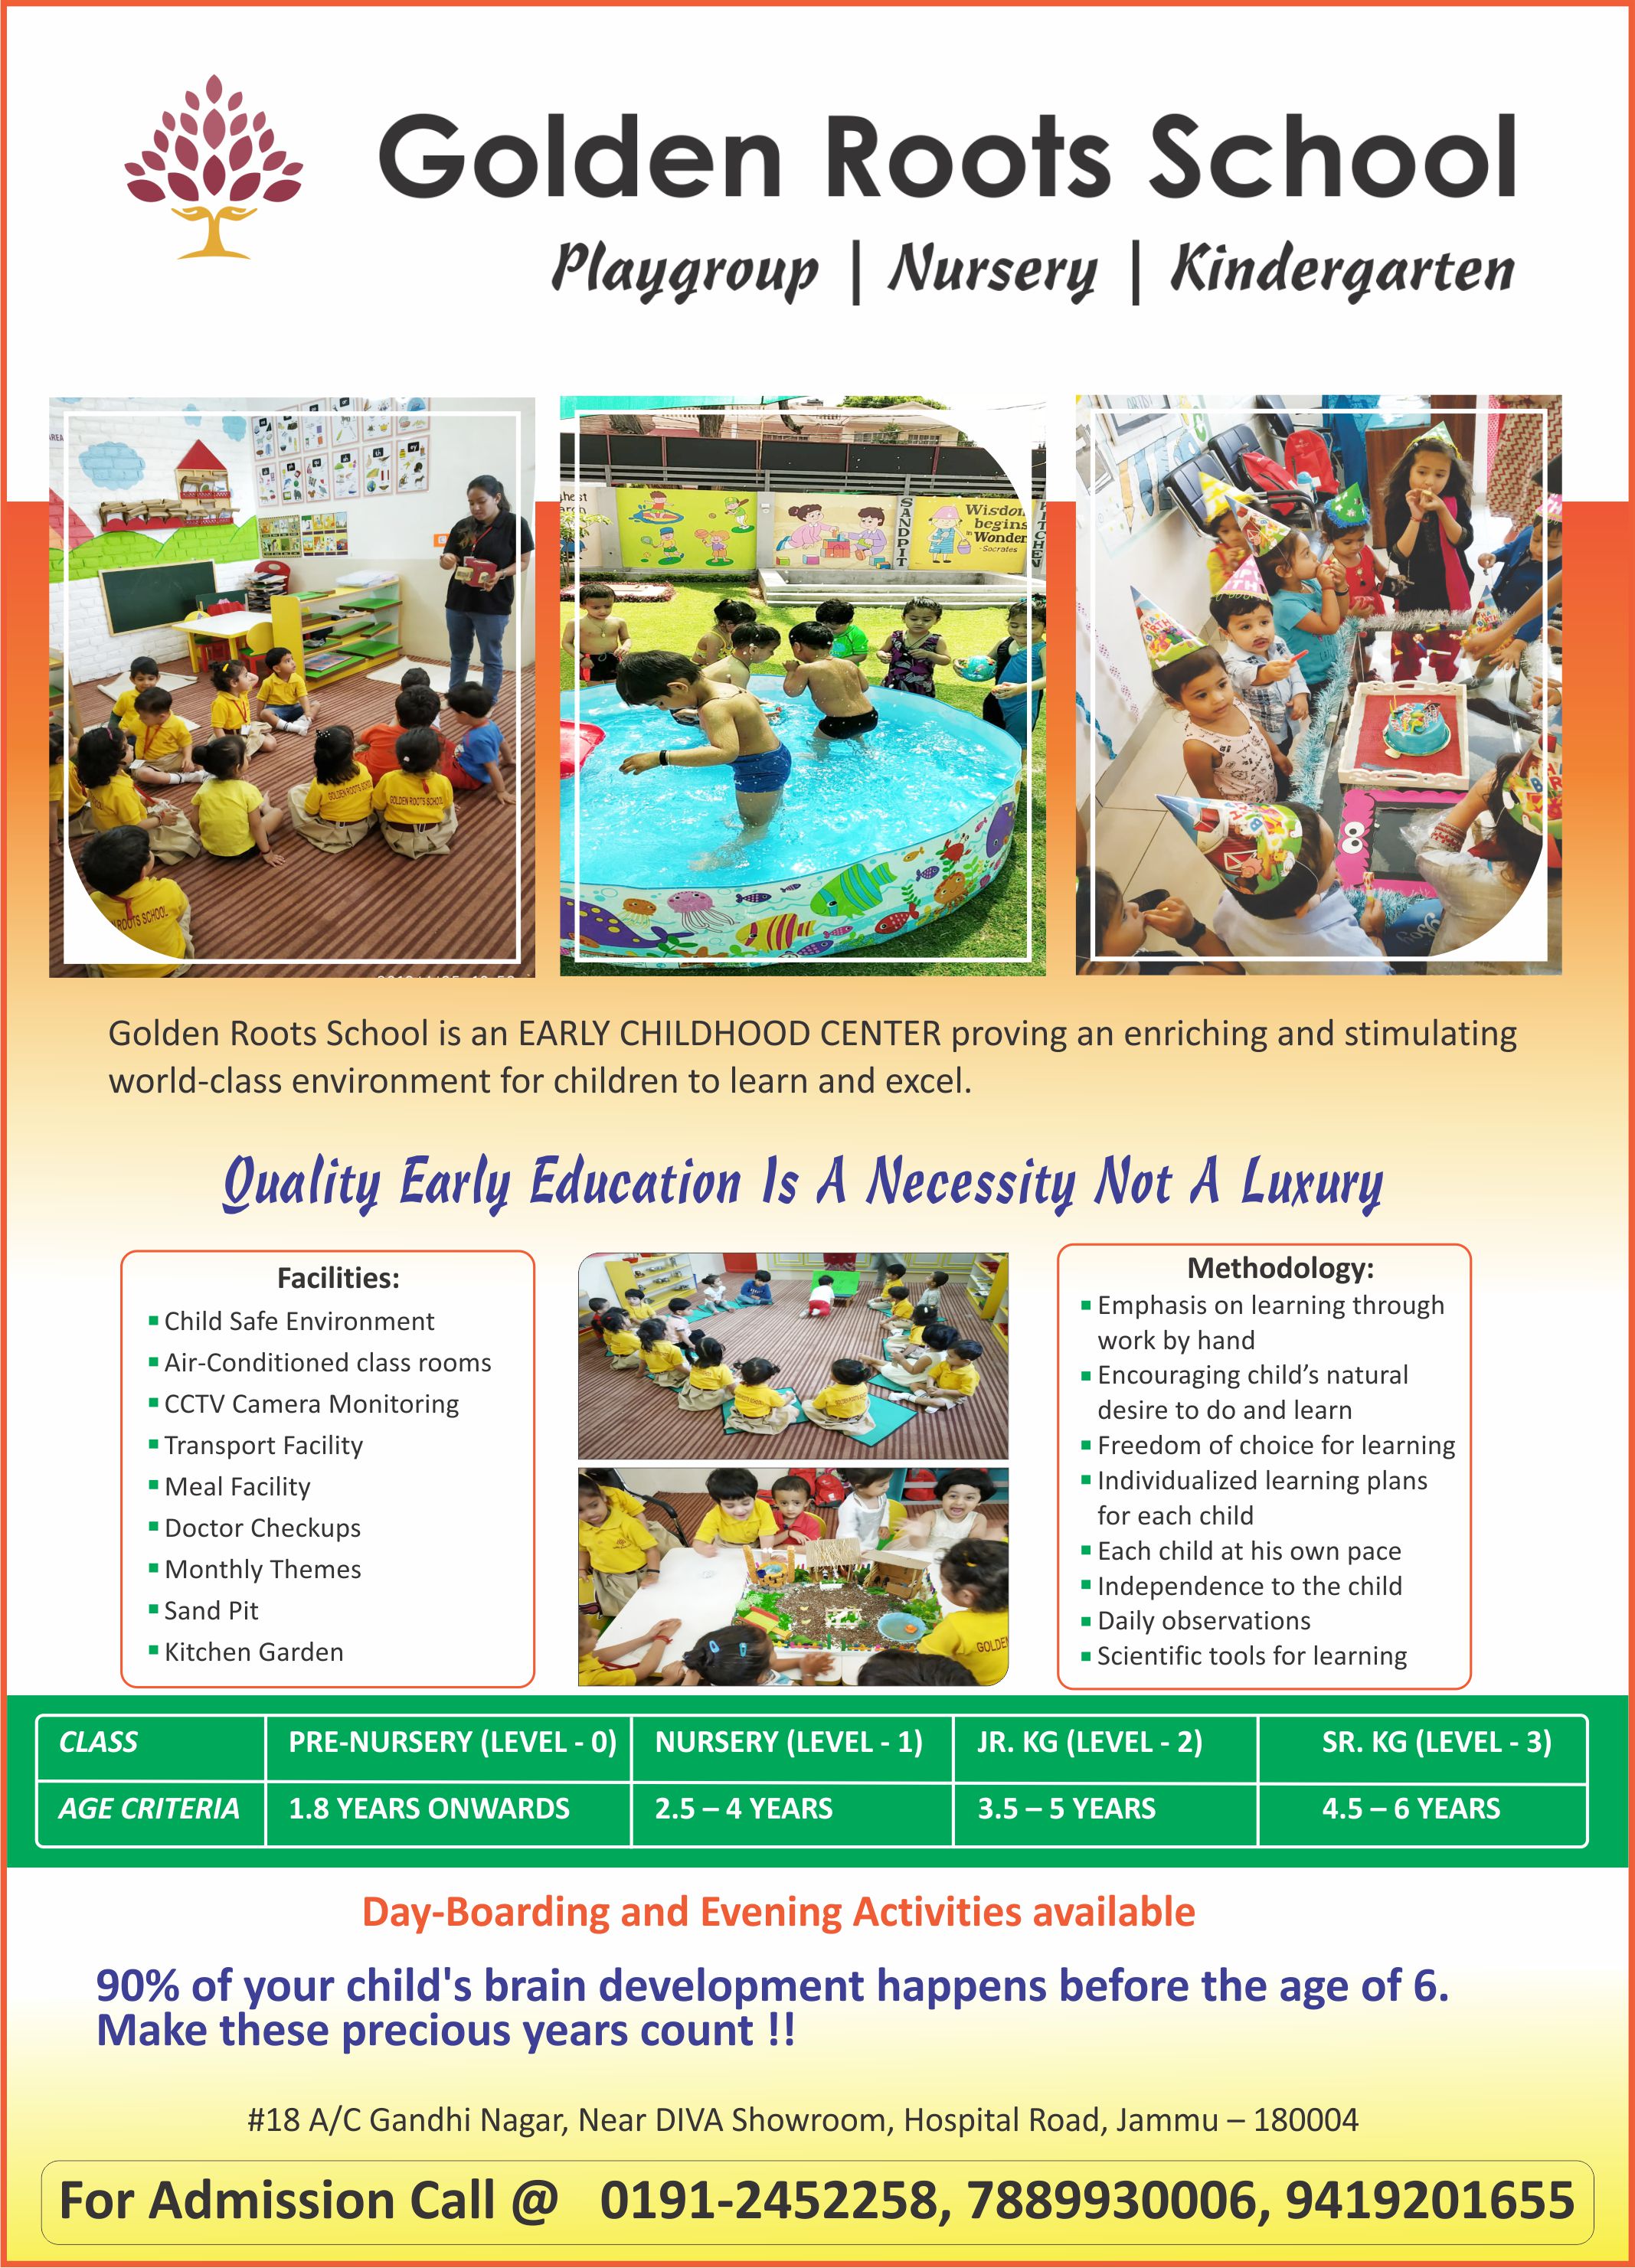 Golden Roots School Educational Institutions Kinder Garten Cityinfo Yellow Pages Detail Product